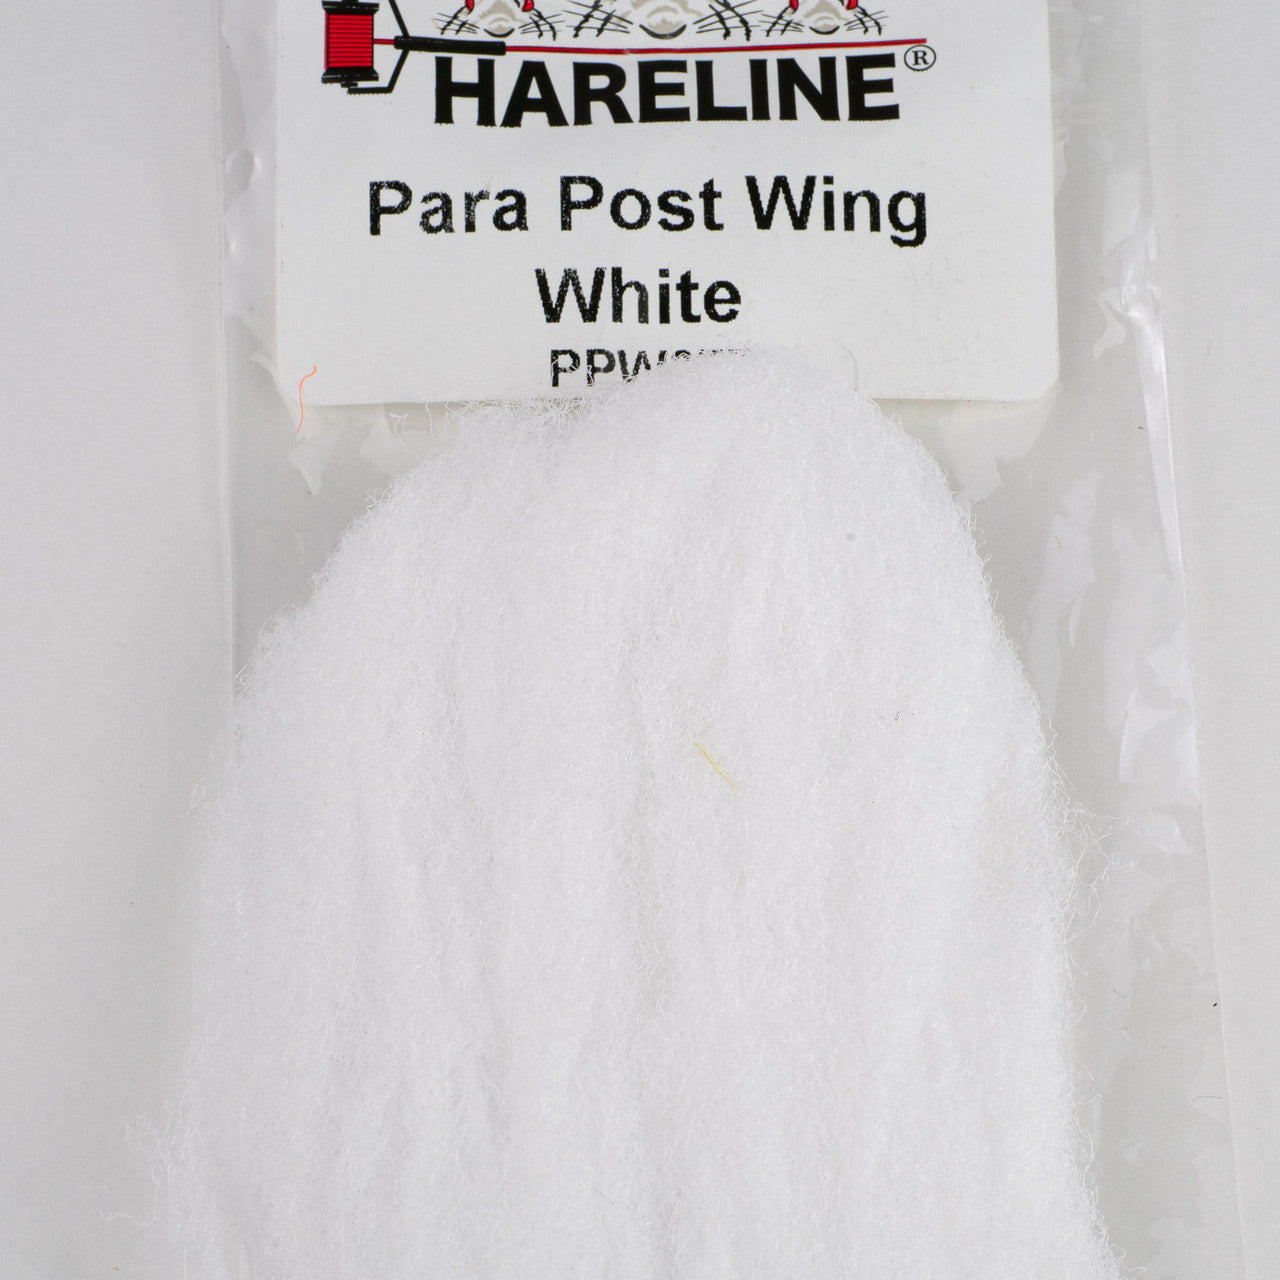 Hareline Para Post Wing and Indicator Material